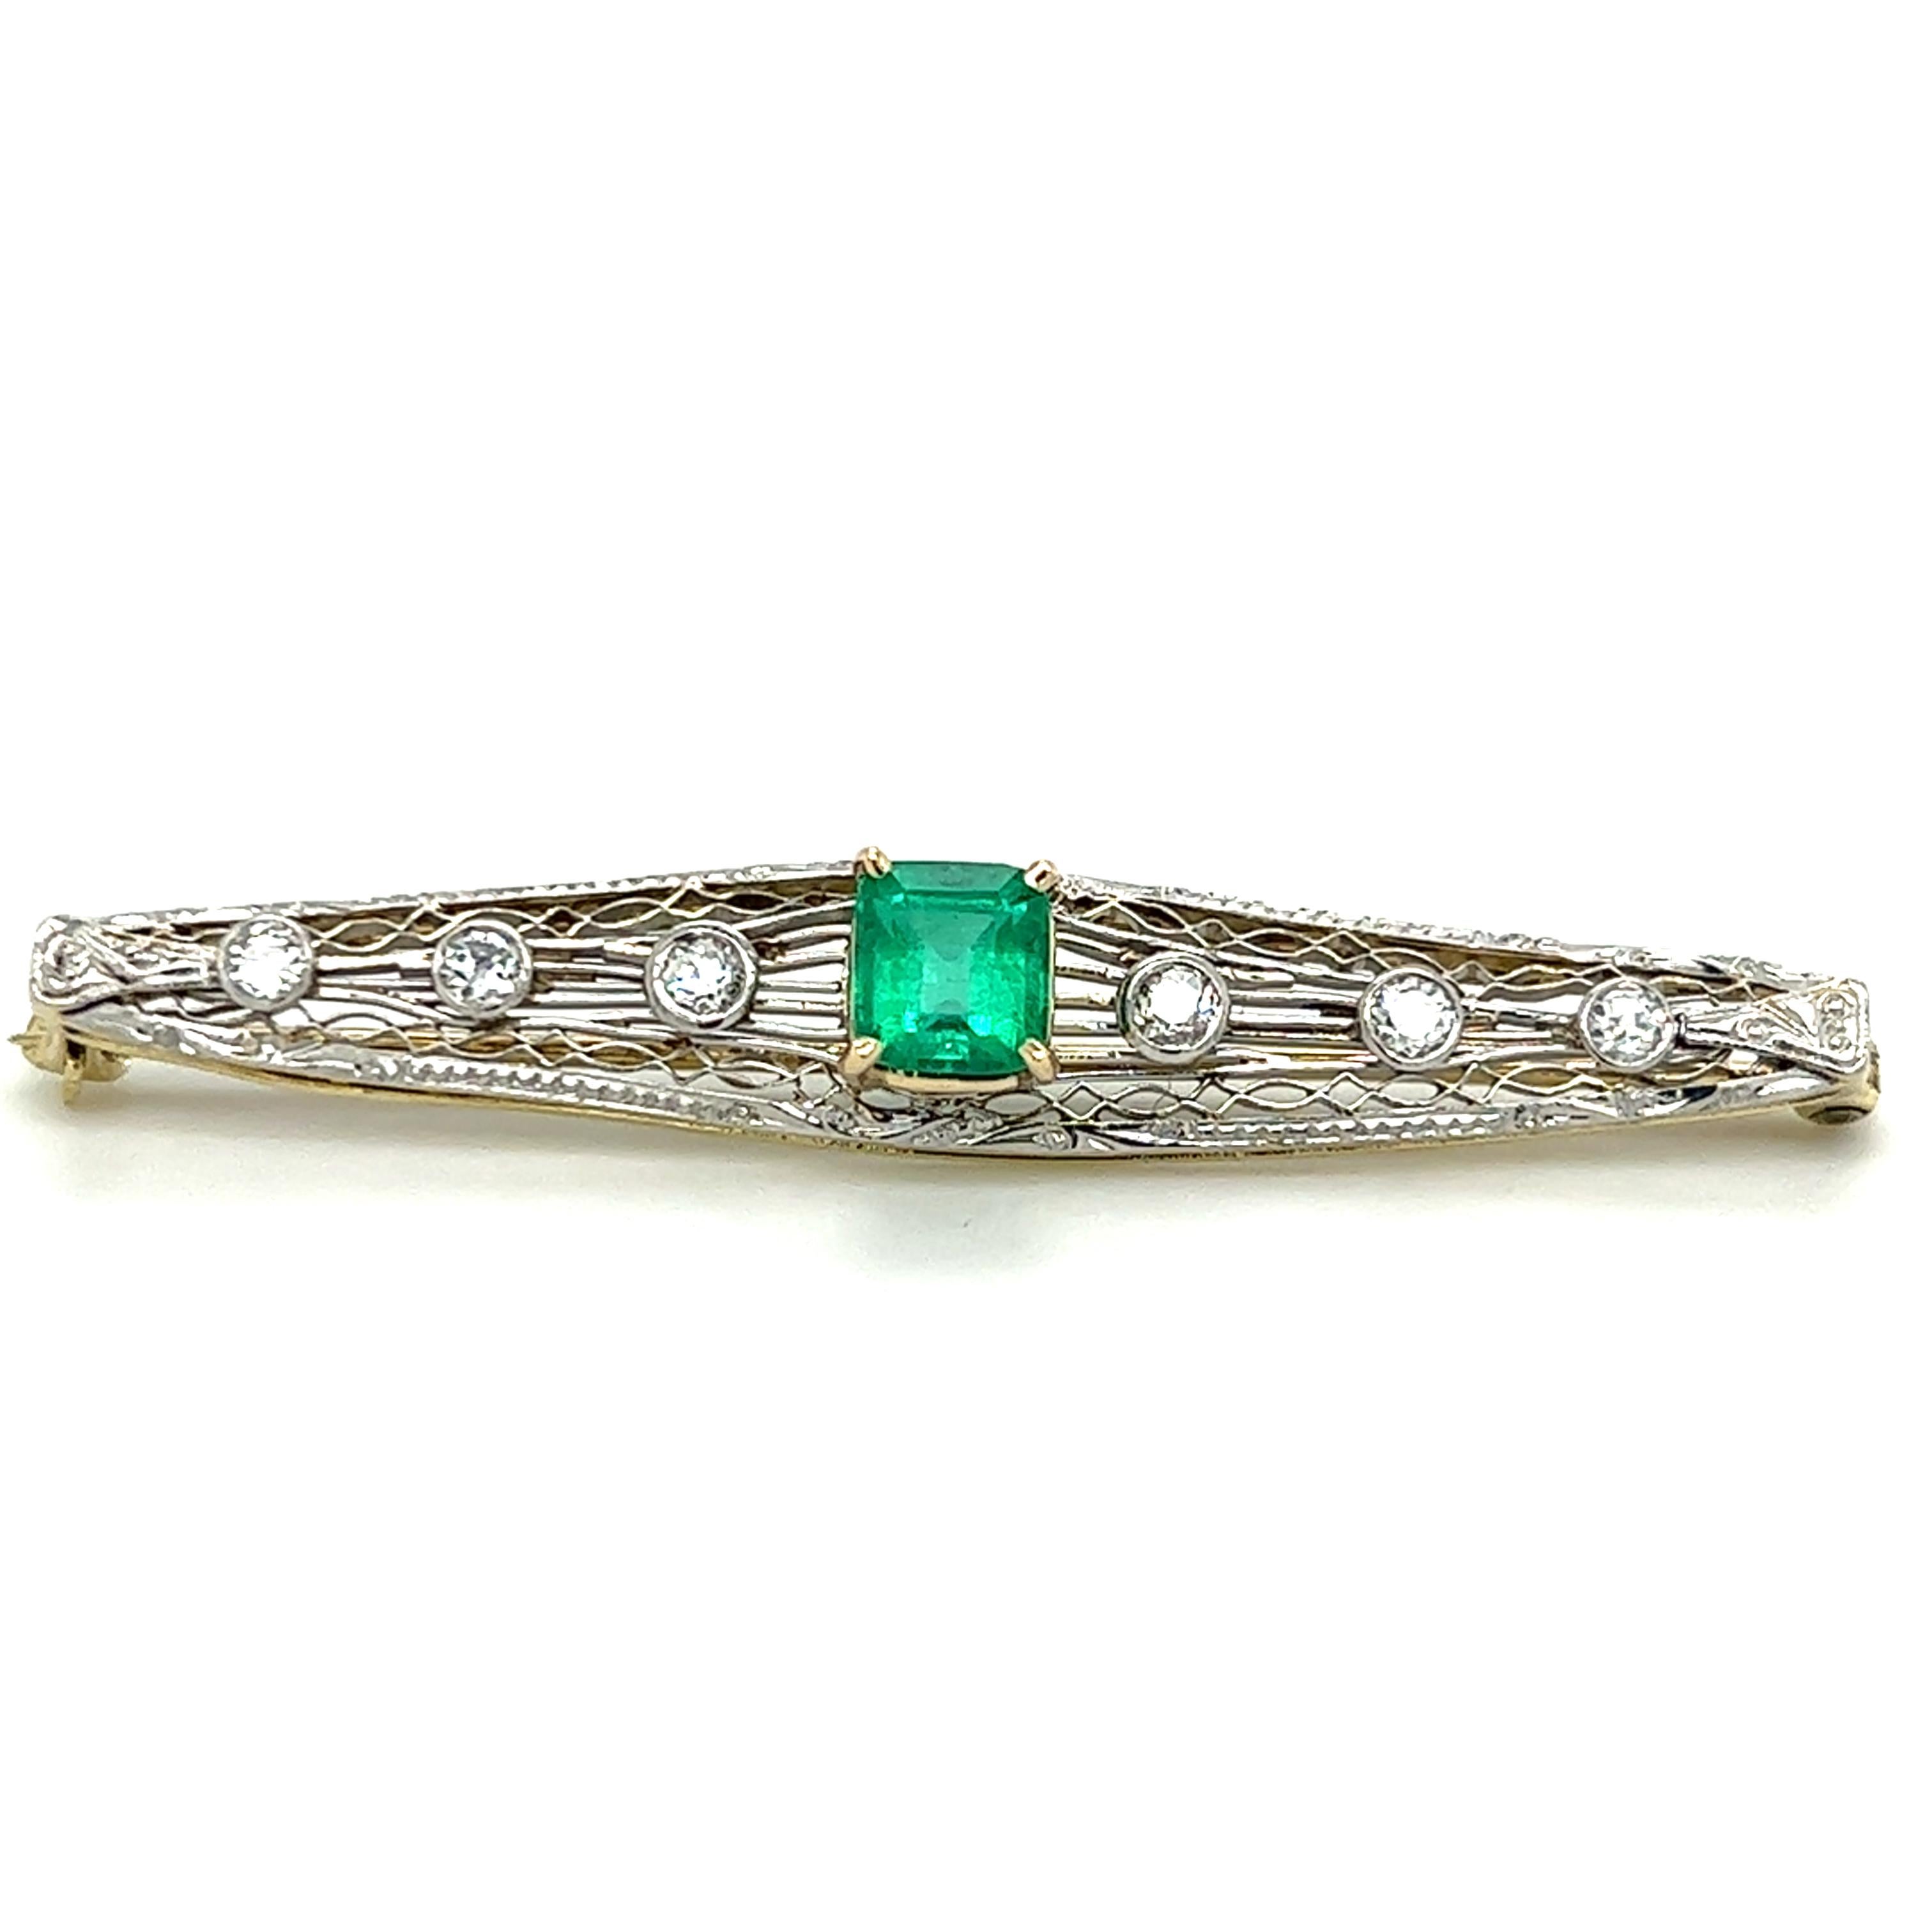 One 14 karat white and yellow gold filigree bar pin set with one (1) 0.88 carat natural emerald cut emerald and six (6) bezel set European cut diamonds, approximately 0.33 carat total weight with matching H/I color and SI/I1 clarity.  The pin